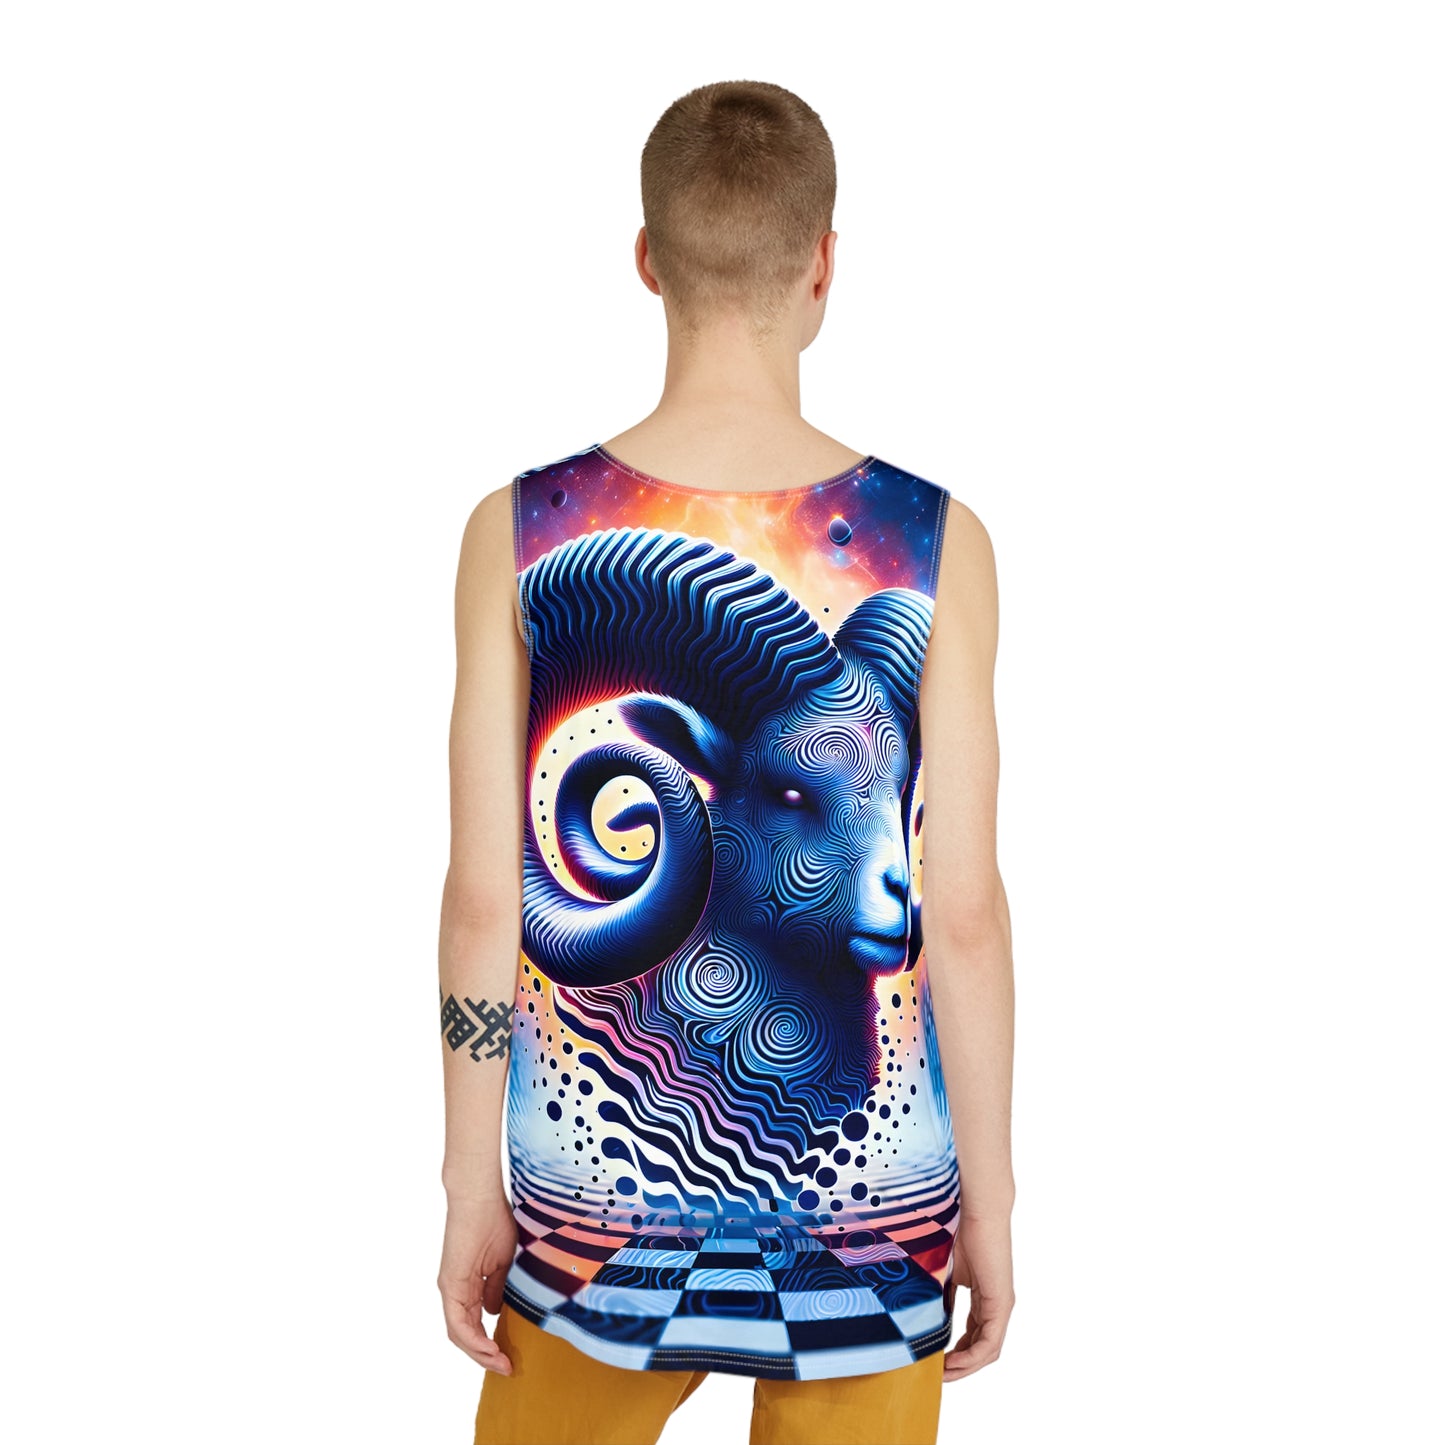 Aries Gift 2024 v1 Psychedelic T-shirt Tank Top by Meta Zen - Festival Rave Street Ware